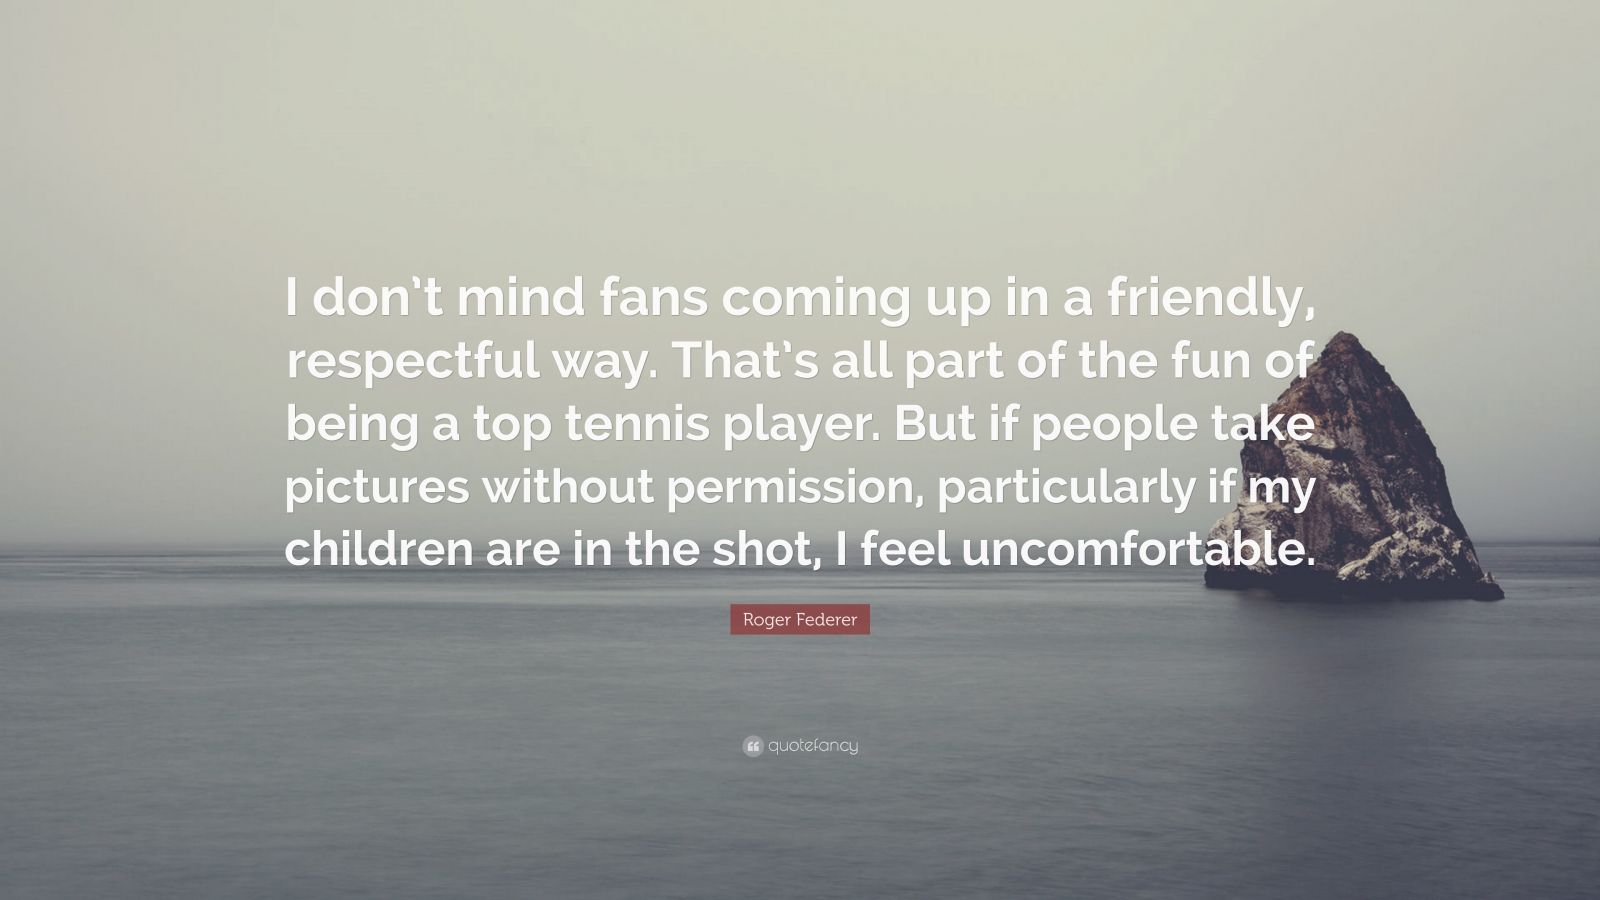 Roger Federer Quote: "I don't mind fans coming up in a ...